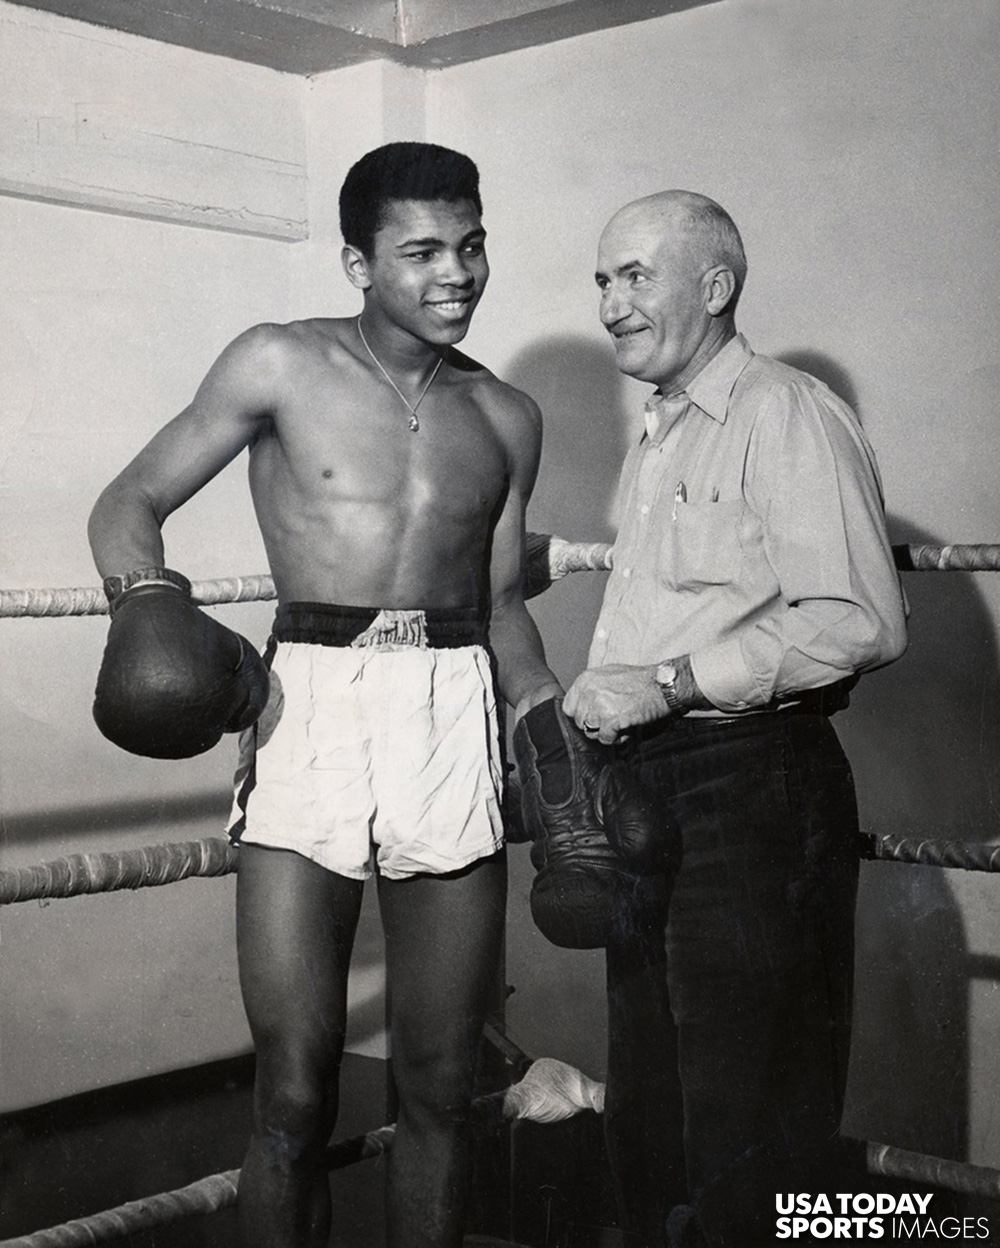 Joe Martin (right) with Cassius Clay, later known as Muhammad Ali (left), when he was a top prospect in 1960. Martin was Ali's first boxing teacher.  //  Credit: Tom Easterling, The Courier-Journal, USA TODAY Sports